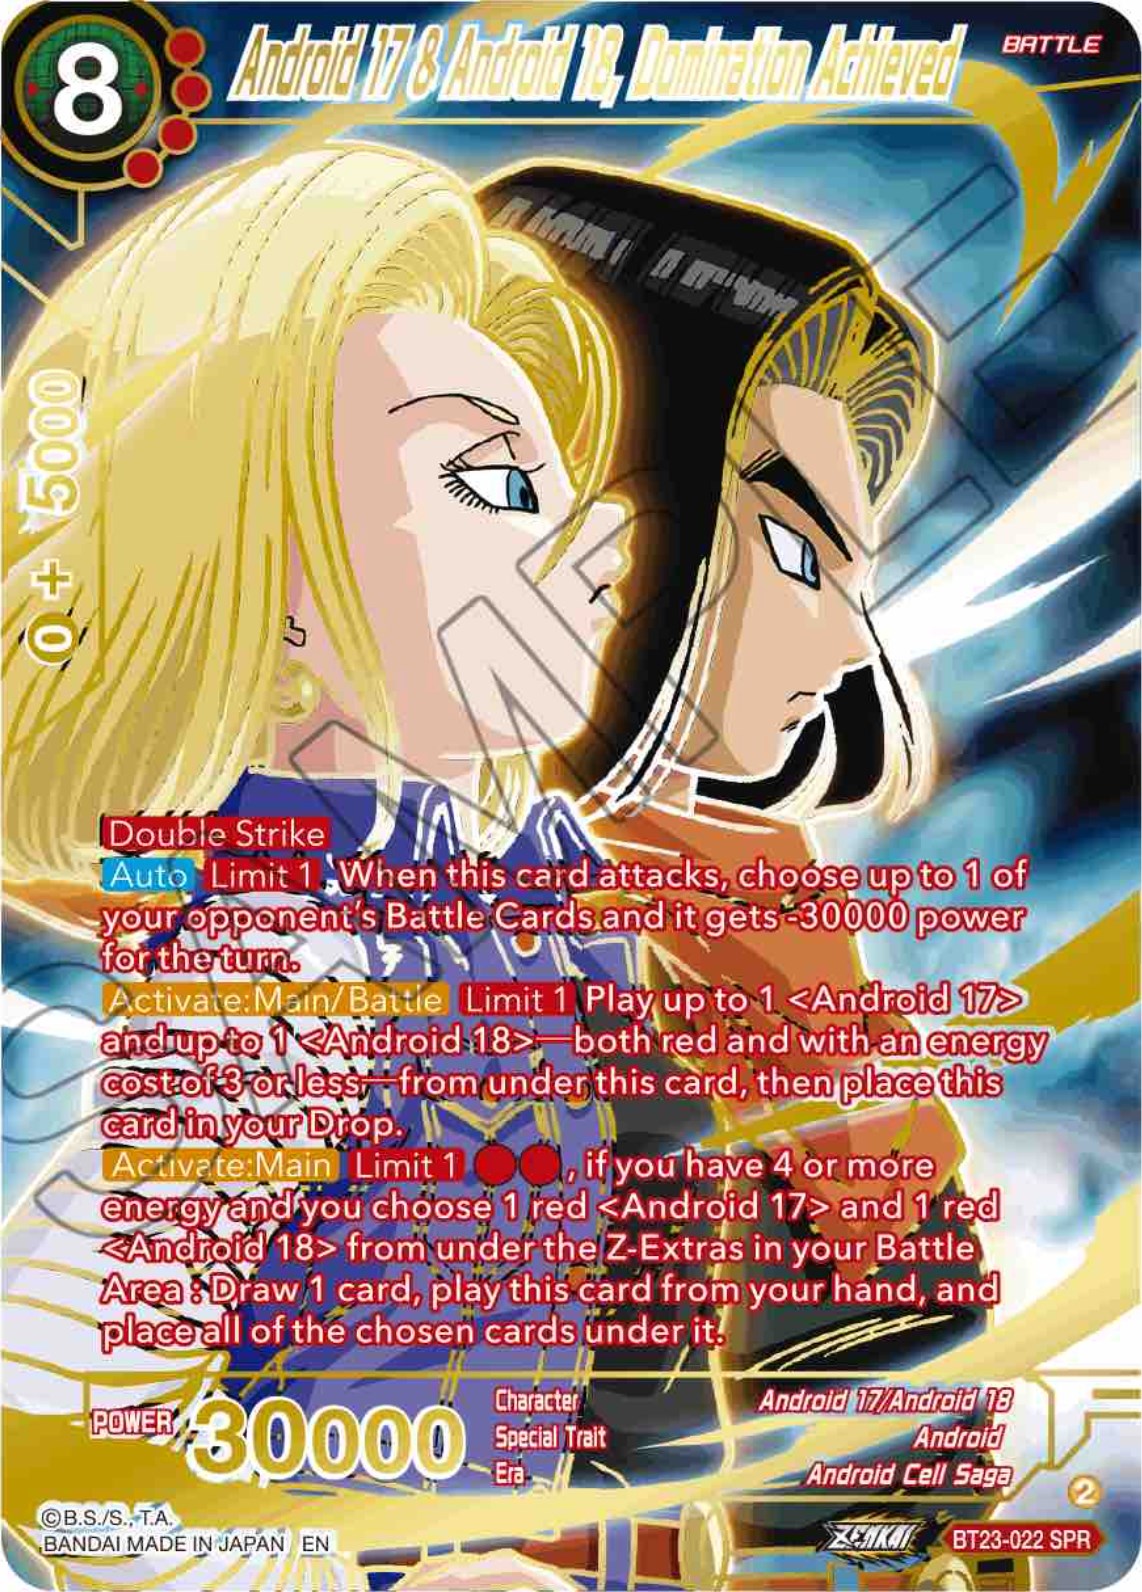 Android 17 & Android 18, Domination Achieved (SPR) (BT23-022) [Perfect Combination] | Total Play